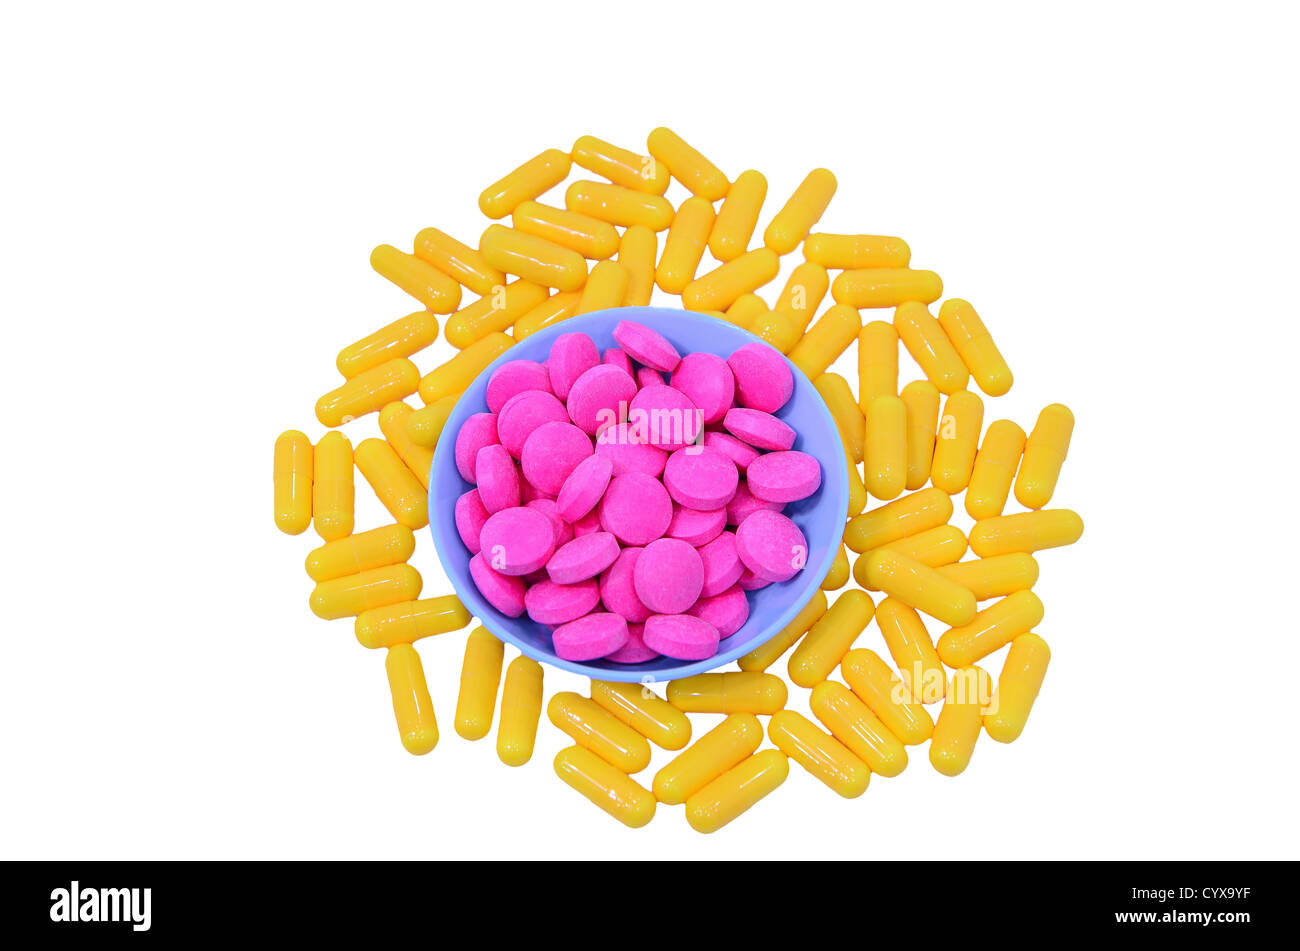 Tablets or capsules. Stock Photo